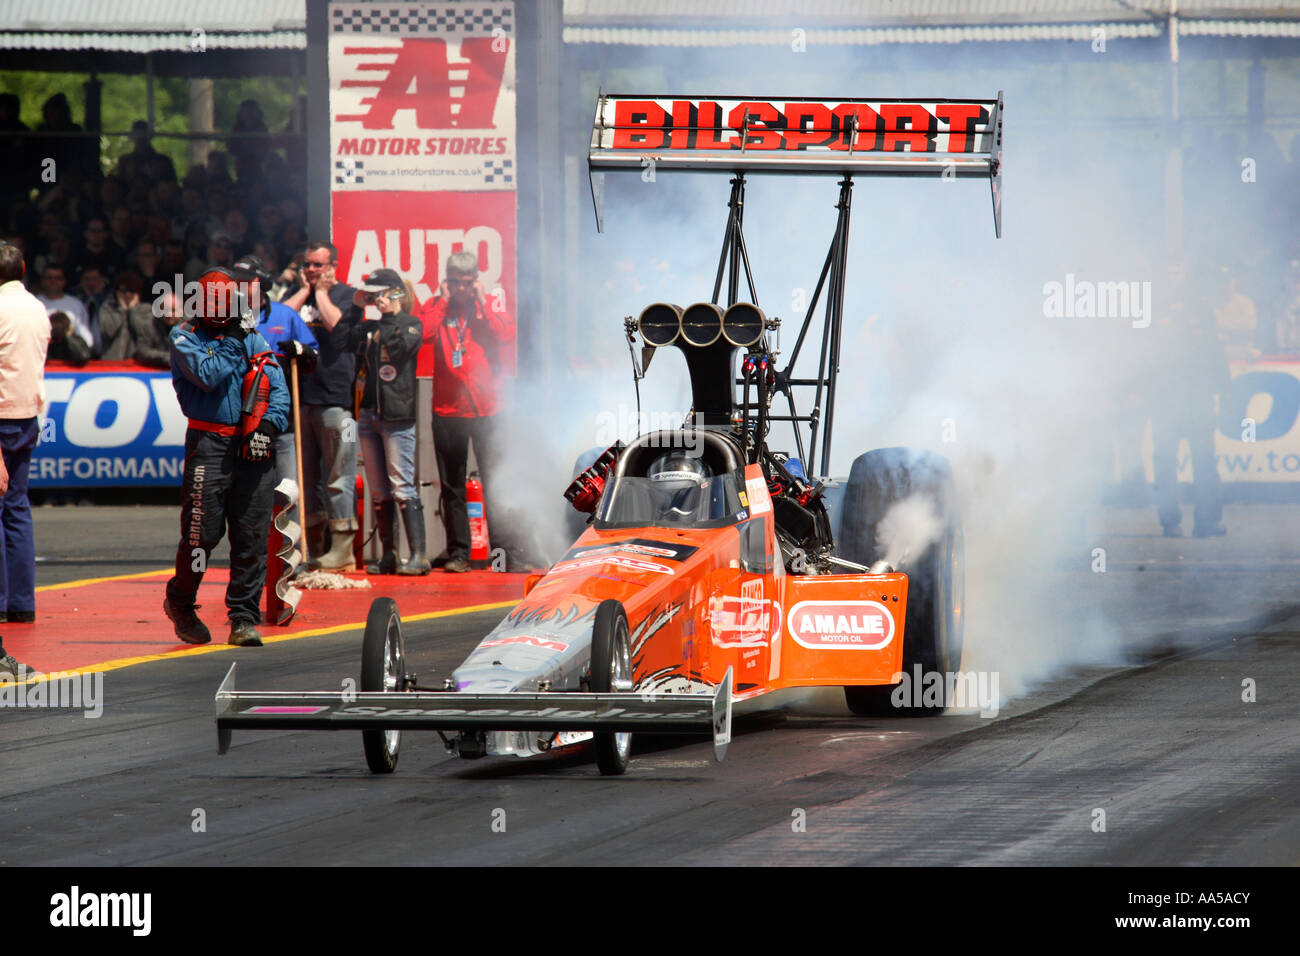 Top Fuel dragster performing burnout Stock Photo